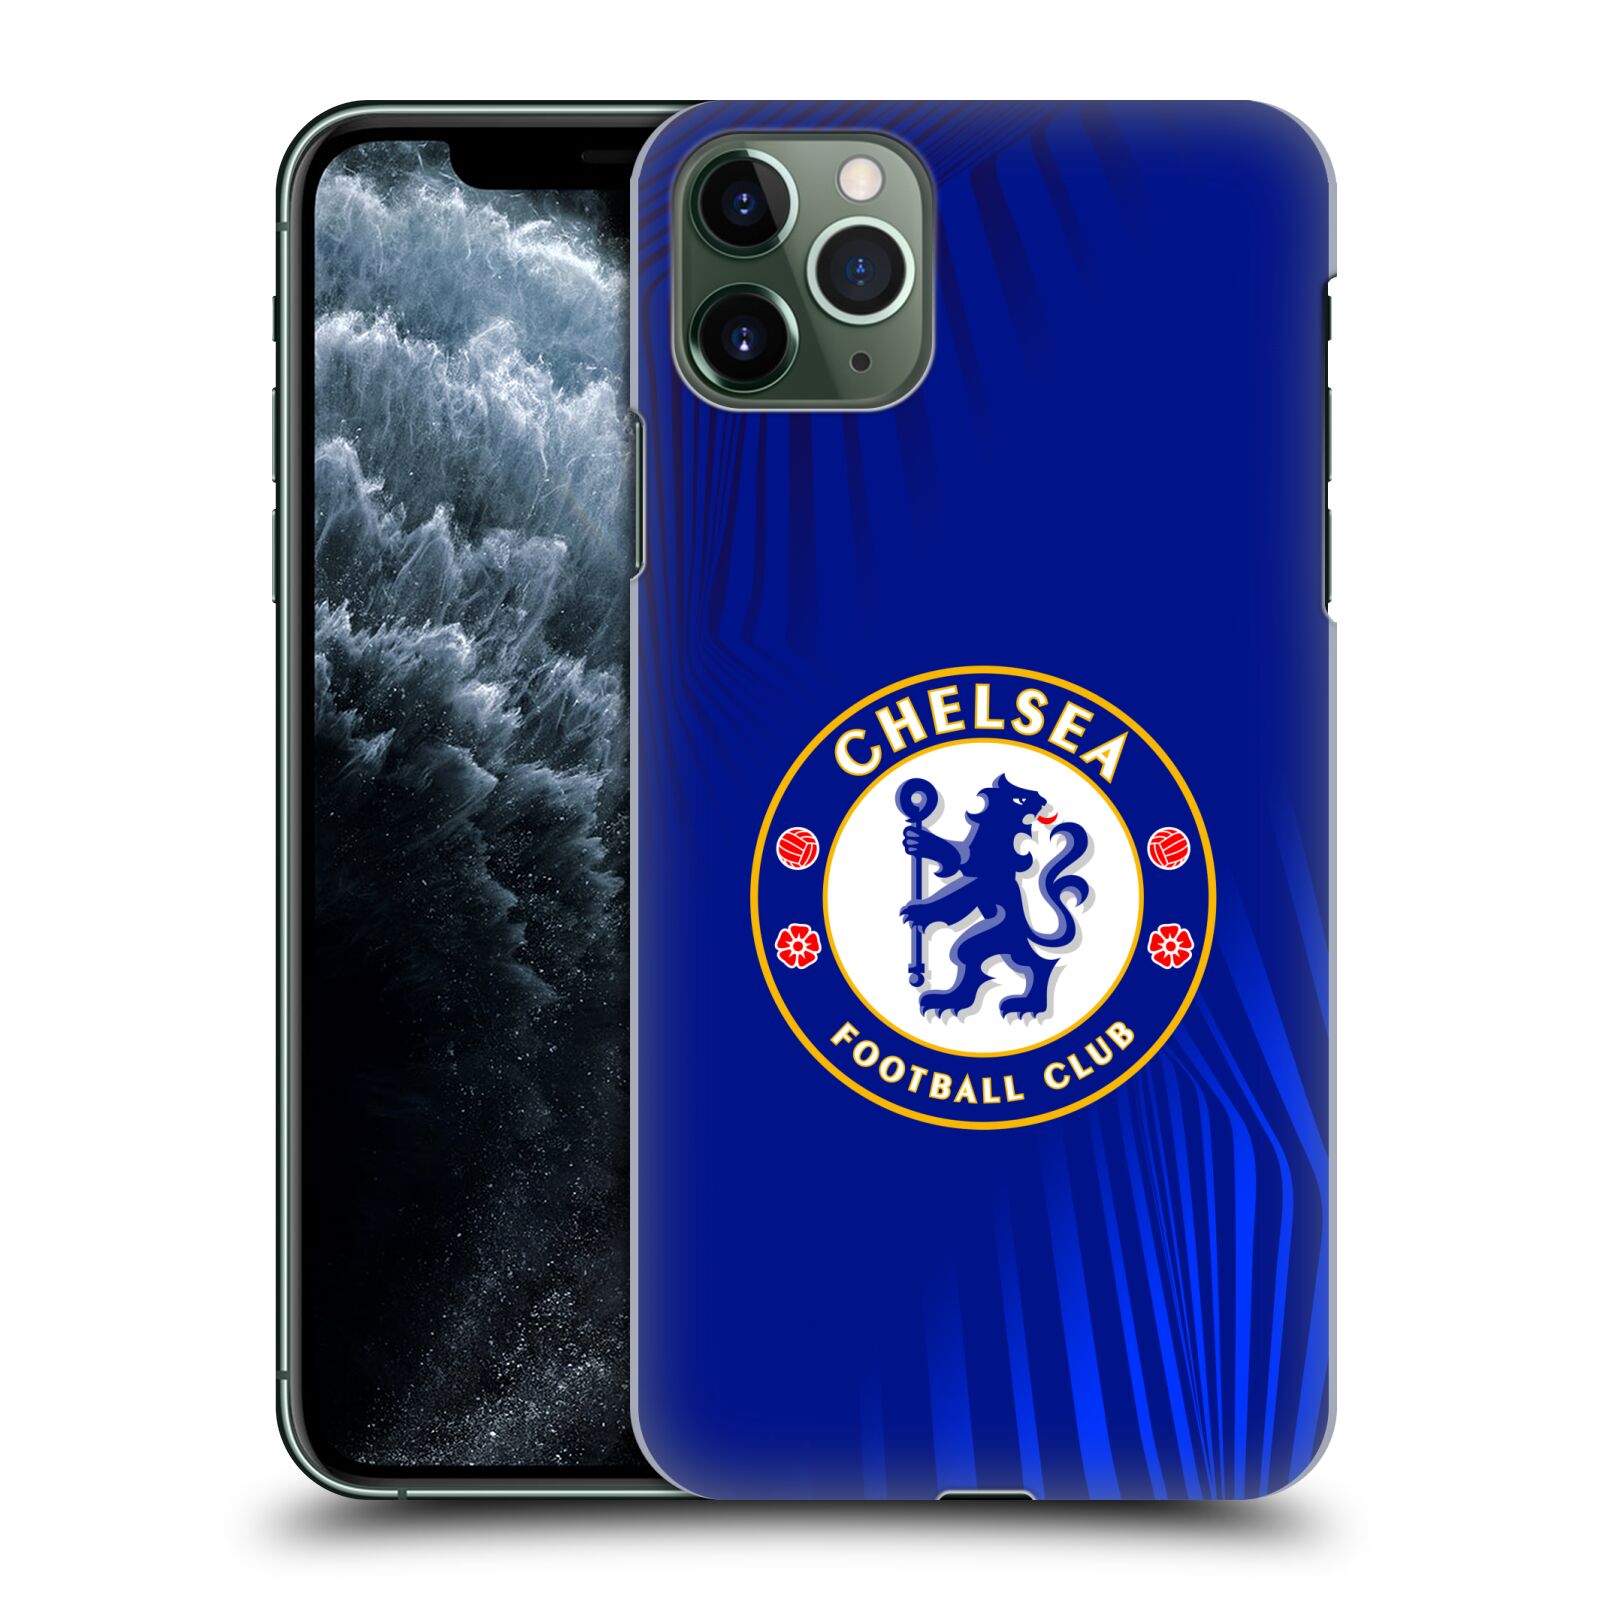 SE 2020 & 2022 Head Case Designs Officially Licensed Chelsea Football Club Super Graphic Crest Leather Book Flip Case Cover Compatible With Apple iPhone 7/8